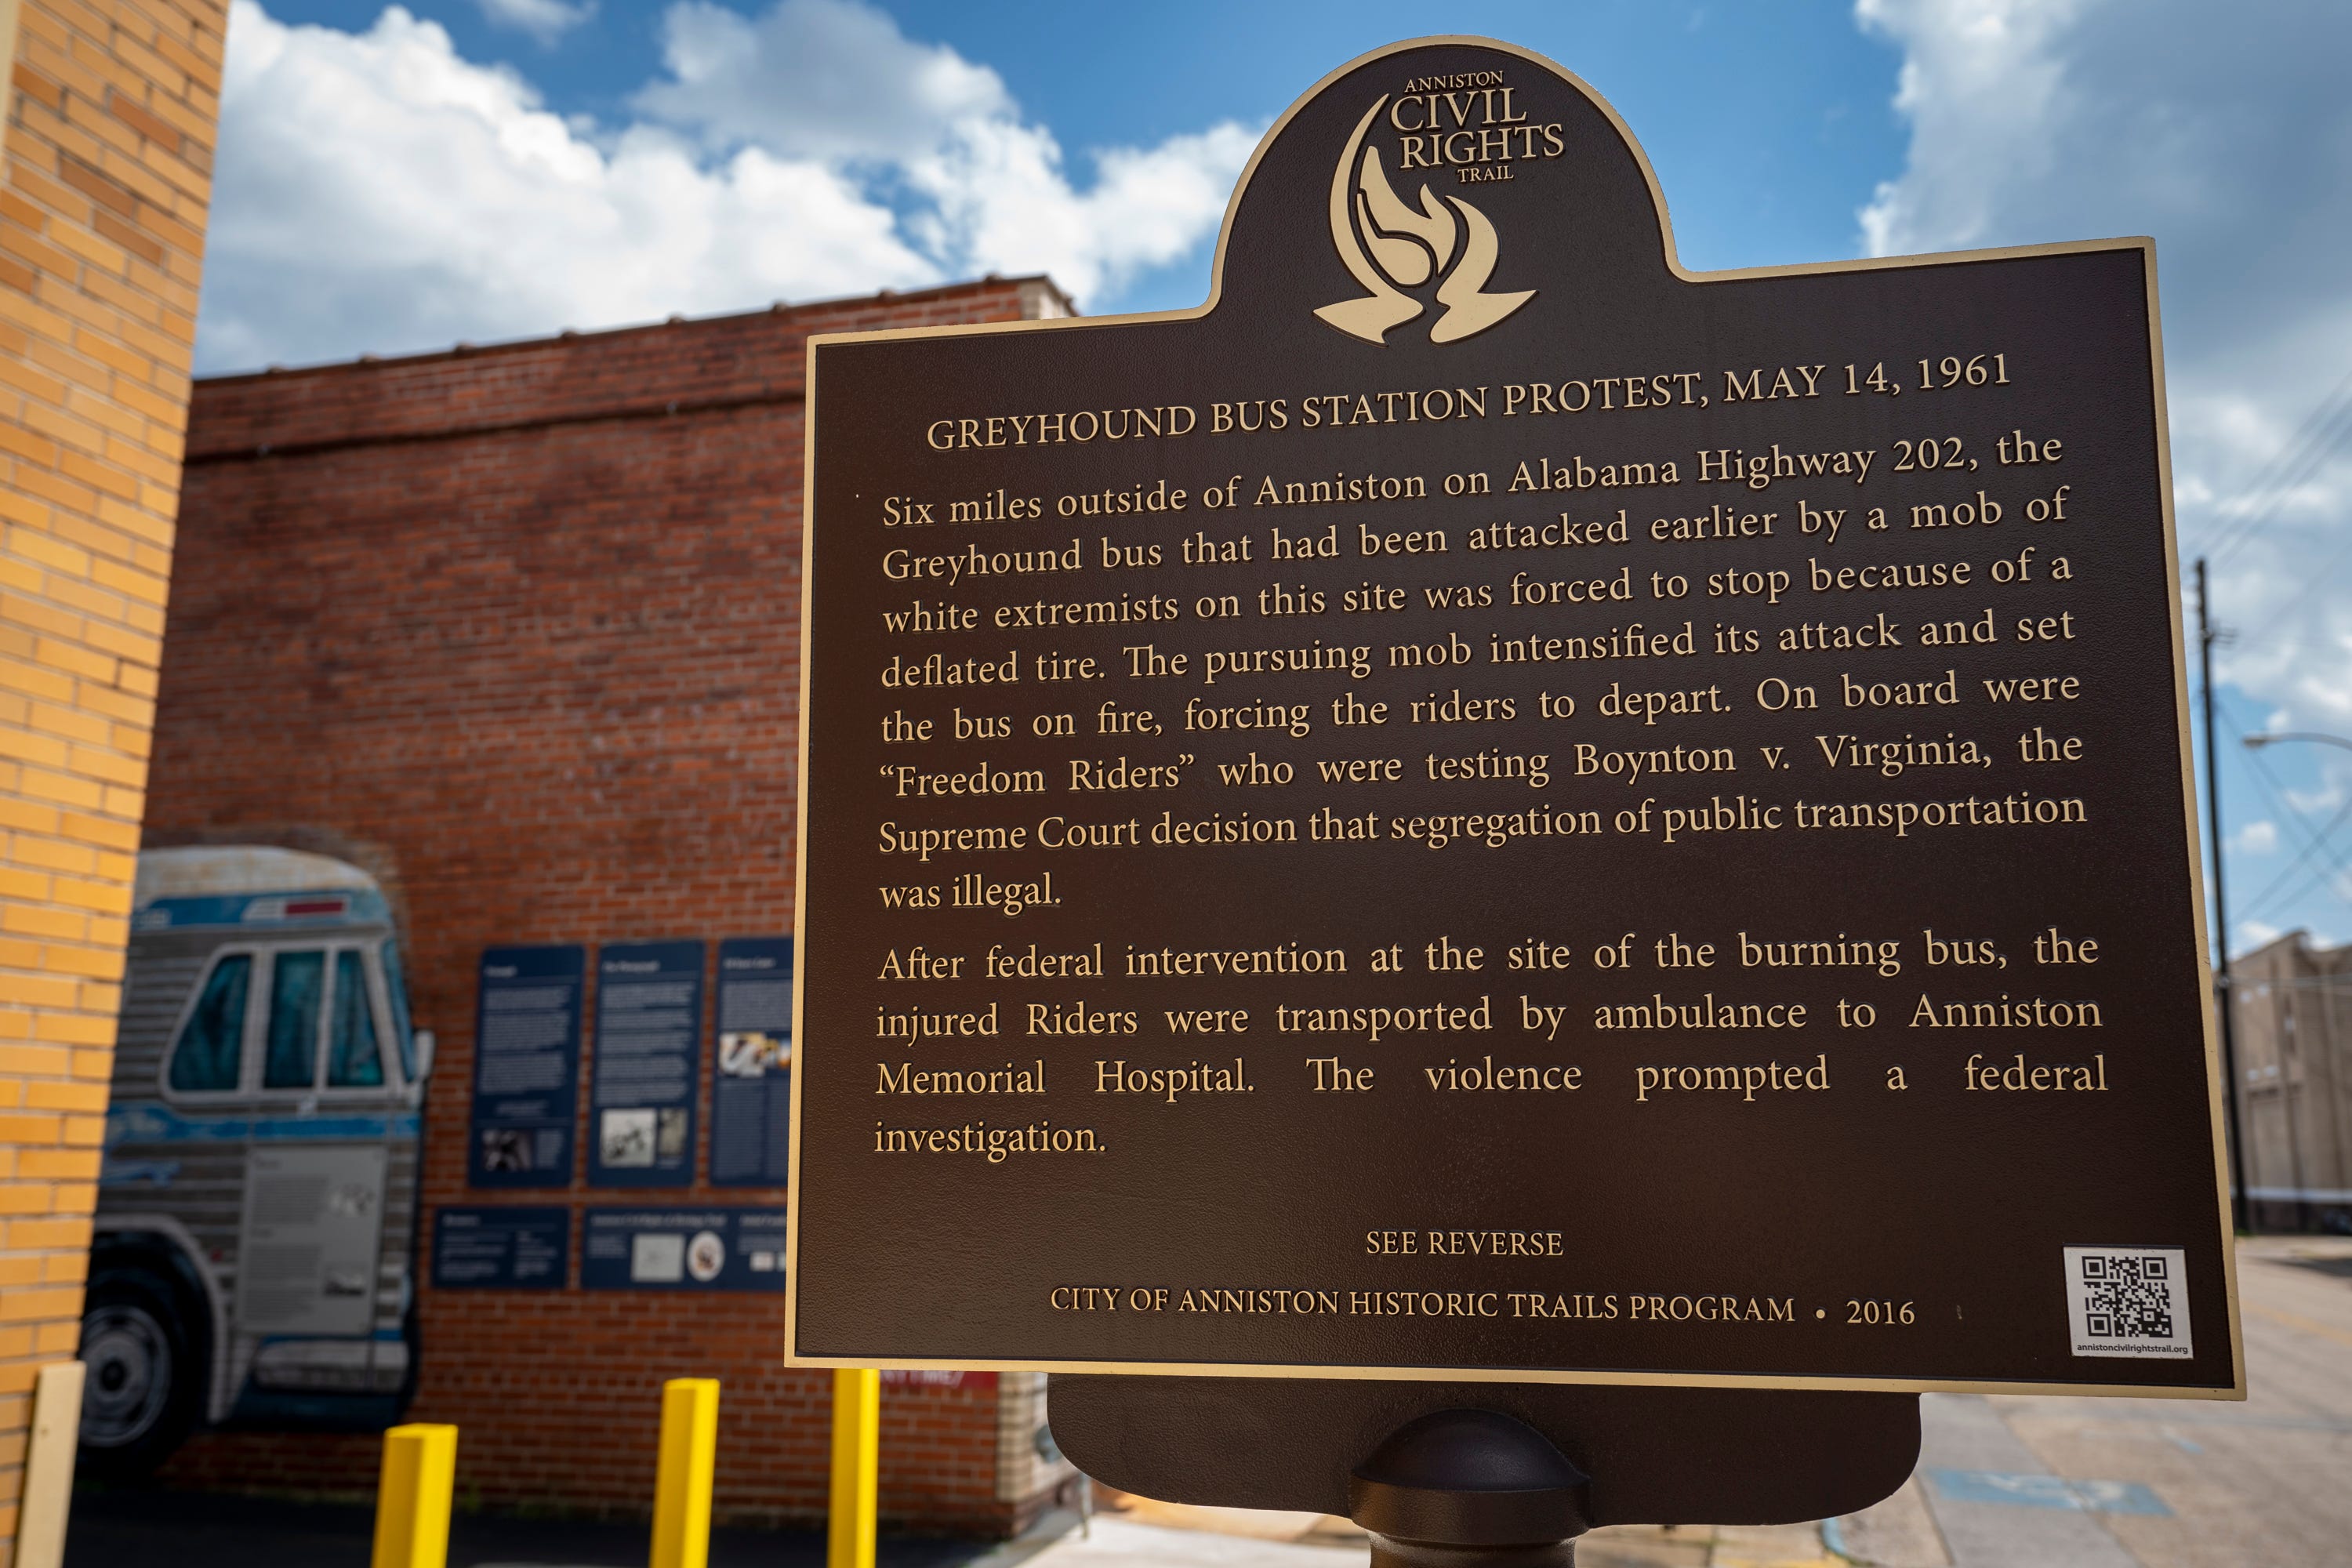 A historical marker describes what took place in the alley beside the Greyhound station where Freedom Riders were met by an angry mob in 1961, now preserved as the Freedom Riders National Monument, in Anniston, Ala., on August 13, 2021. Eleven days into the Freedom Rides aimed at ending segregation, Hank Thomas and other Freedom Riders huddled on a bus on May 14, 1961, just outside Anniston, Alabama, as a white mob slashed tires on their bus, pounded it with tire irons and then threw a firebomb inside. As flames spread, the civil rights activists scrambled off the bus into the angry crowd that beat them with bats, fists and those same tire irons. That brutal confrontation could have ended the group’s 14-day mission to desegregate public interstate accommodations. Instead, more Freedom Riders boarded buses headed into hostile territory. The rides focused attention on the violent resistance to segregation and are credited with helping integrate accommodations.